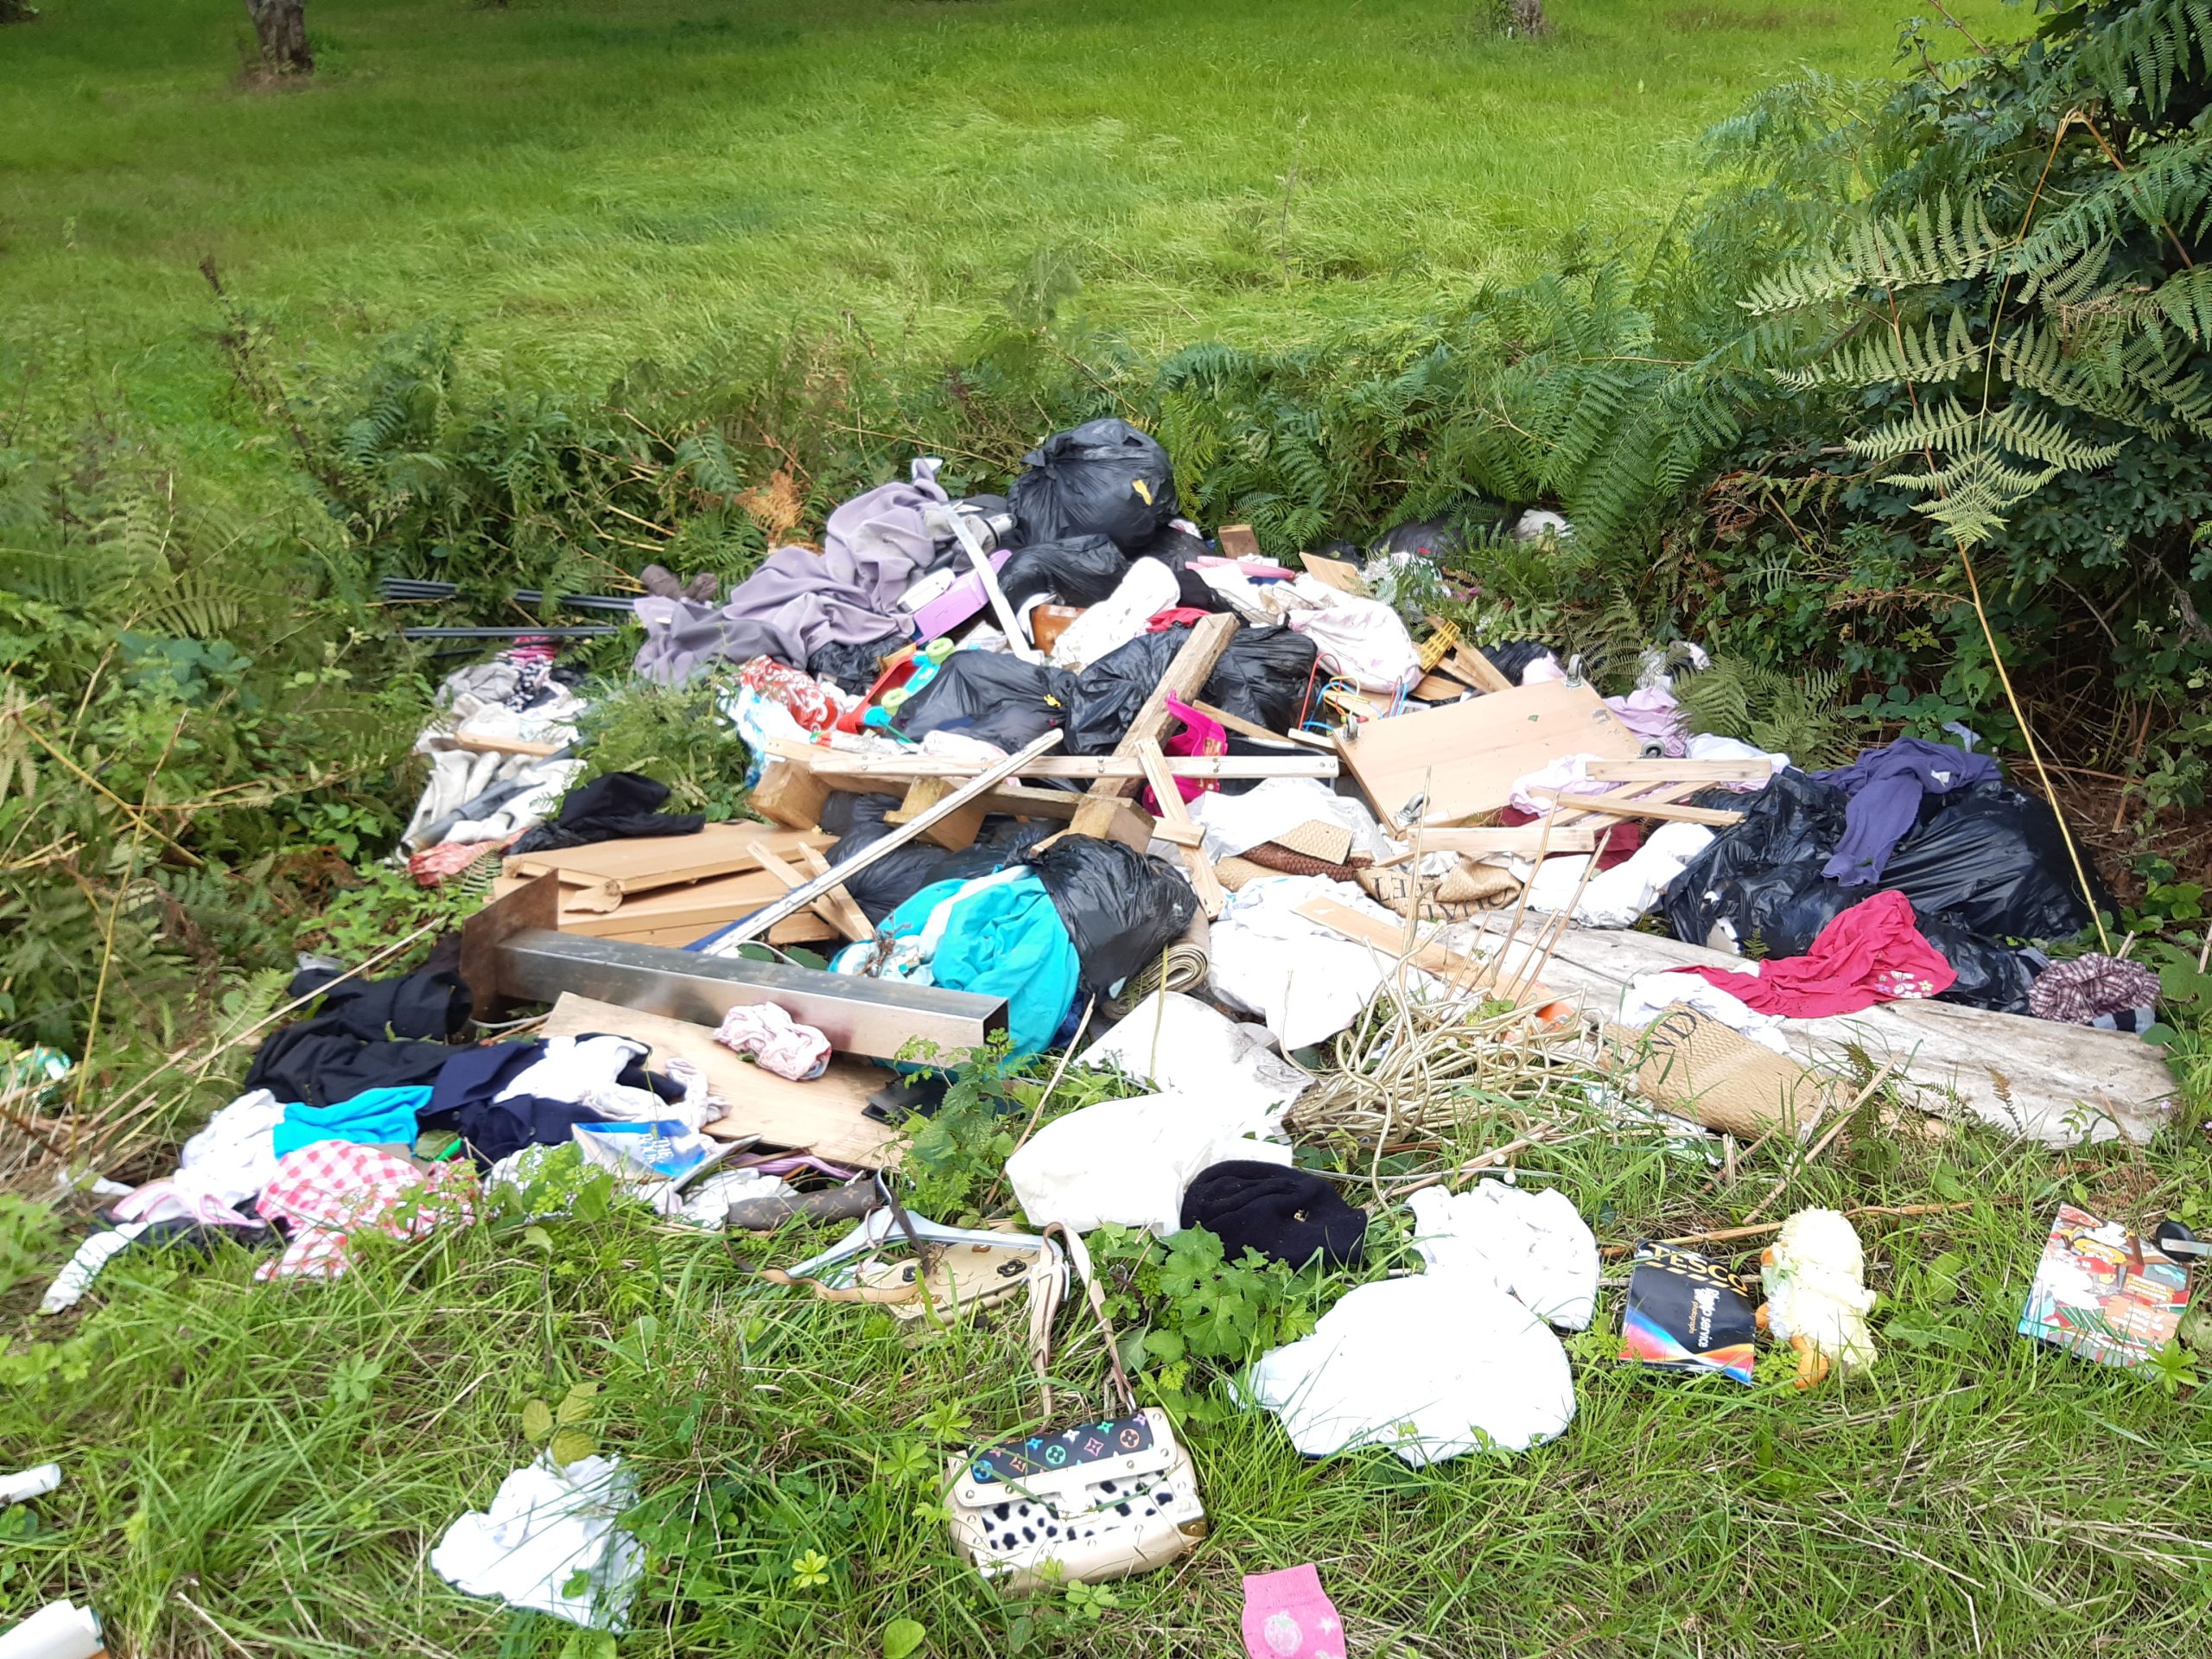 NEWS | Herefordshire Council has won an enforcement case against a man found guilty of two counts of fly-tipping